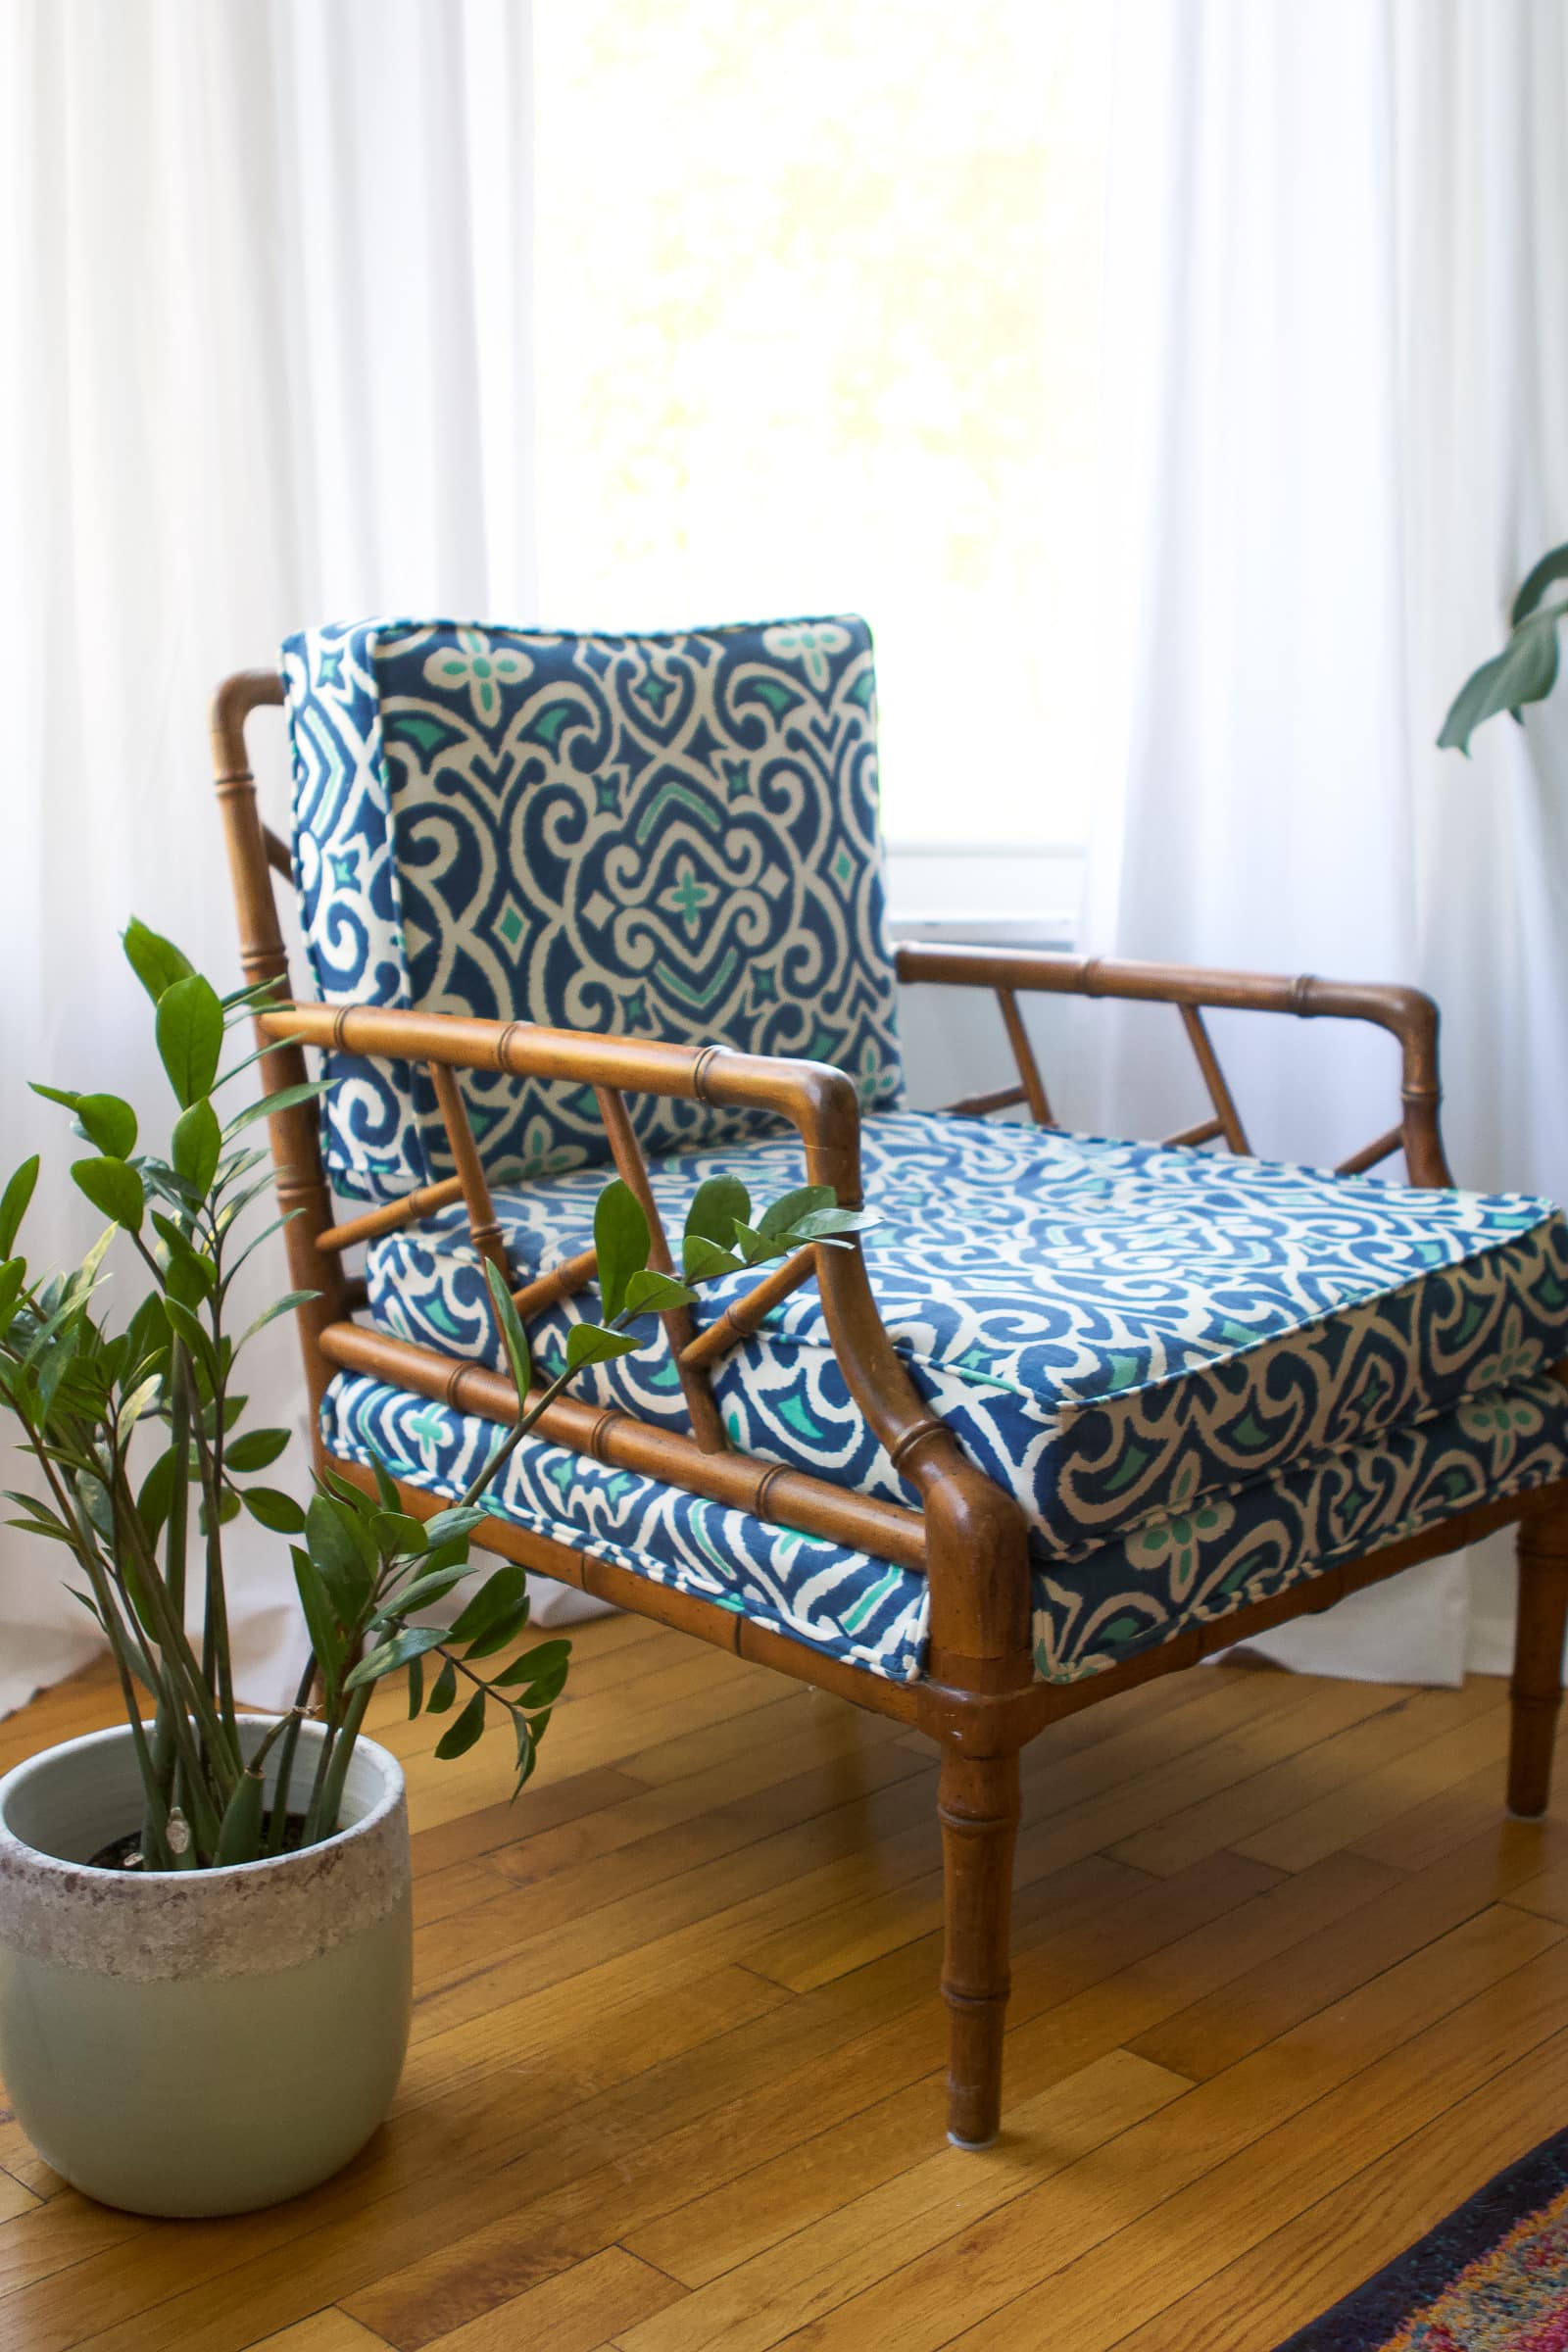 Bold patterned chair in the living room